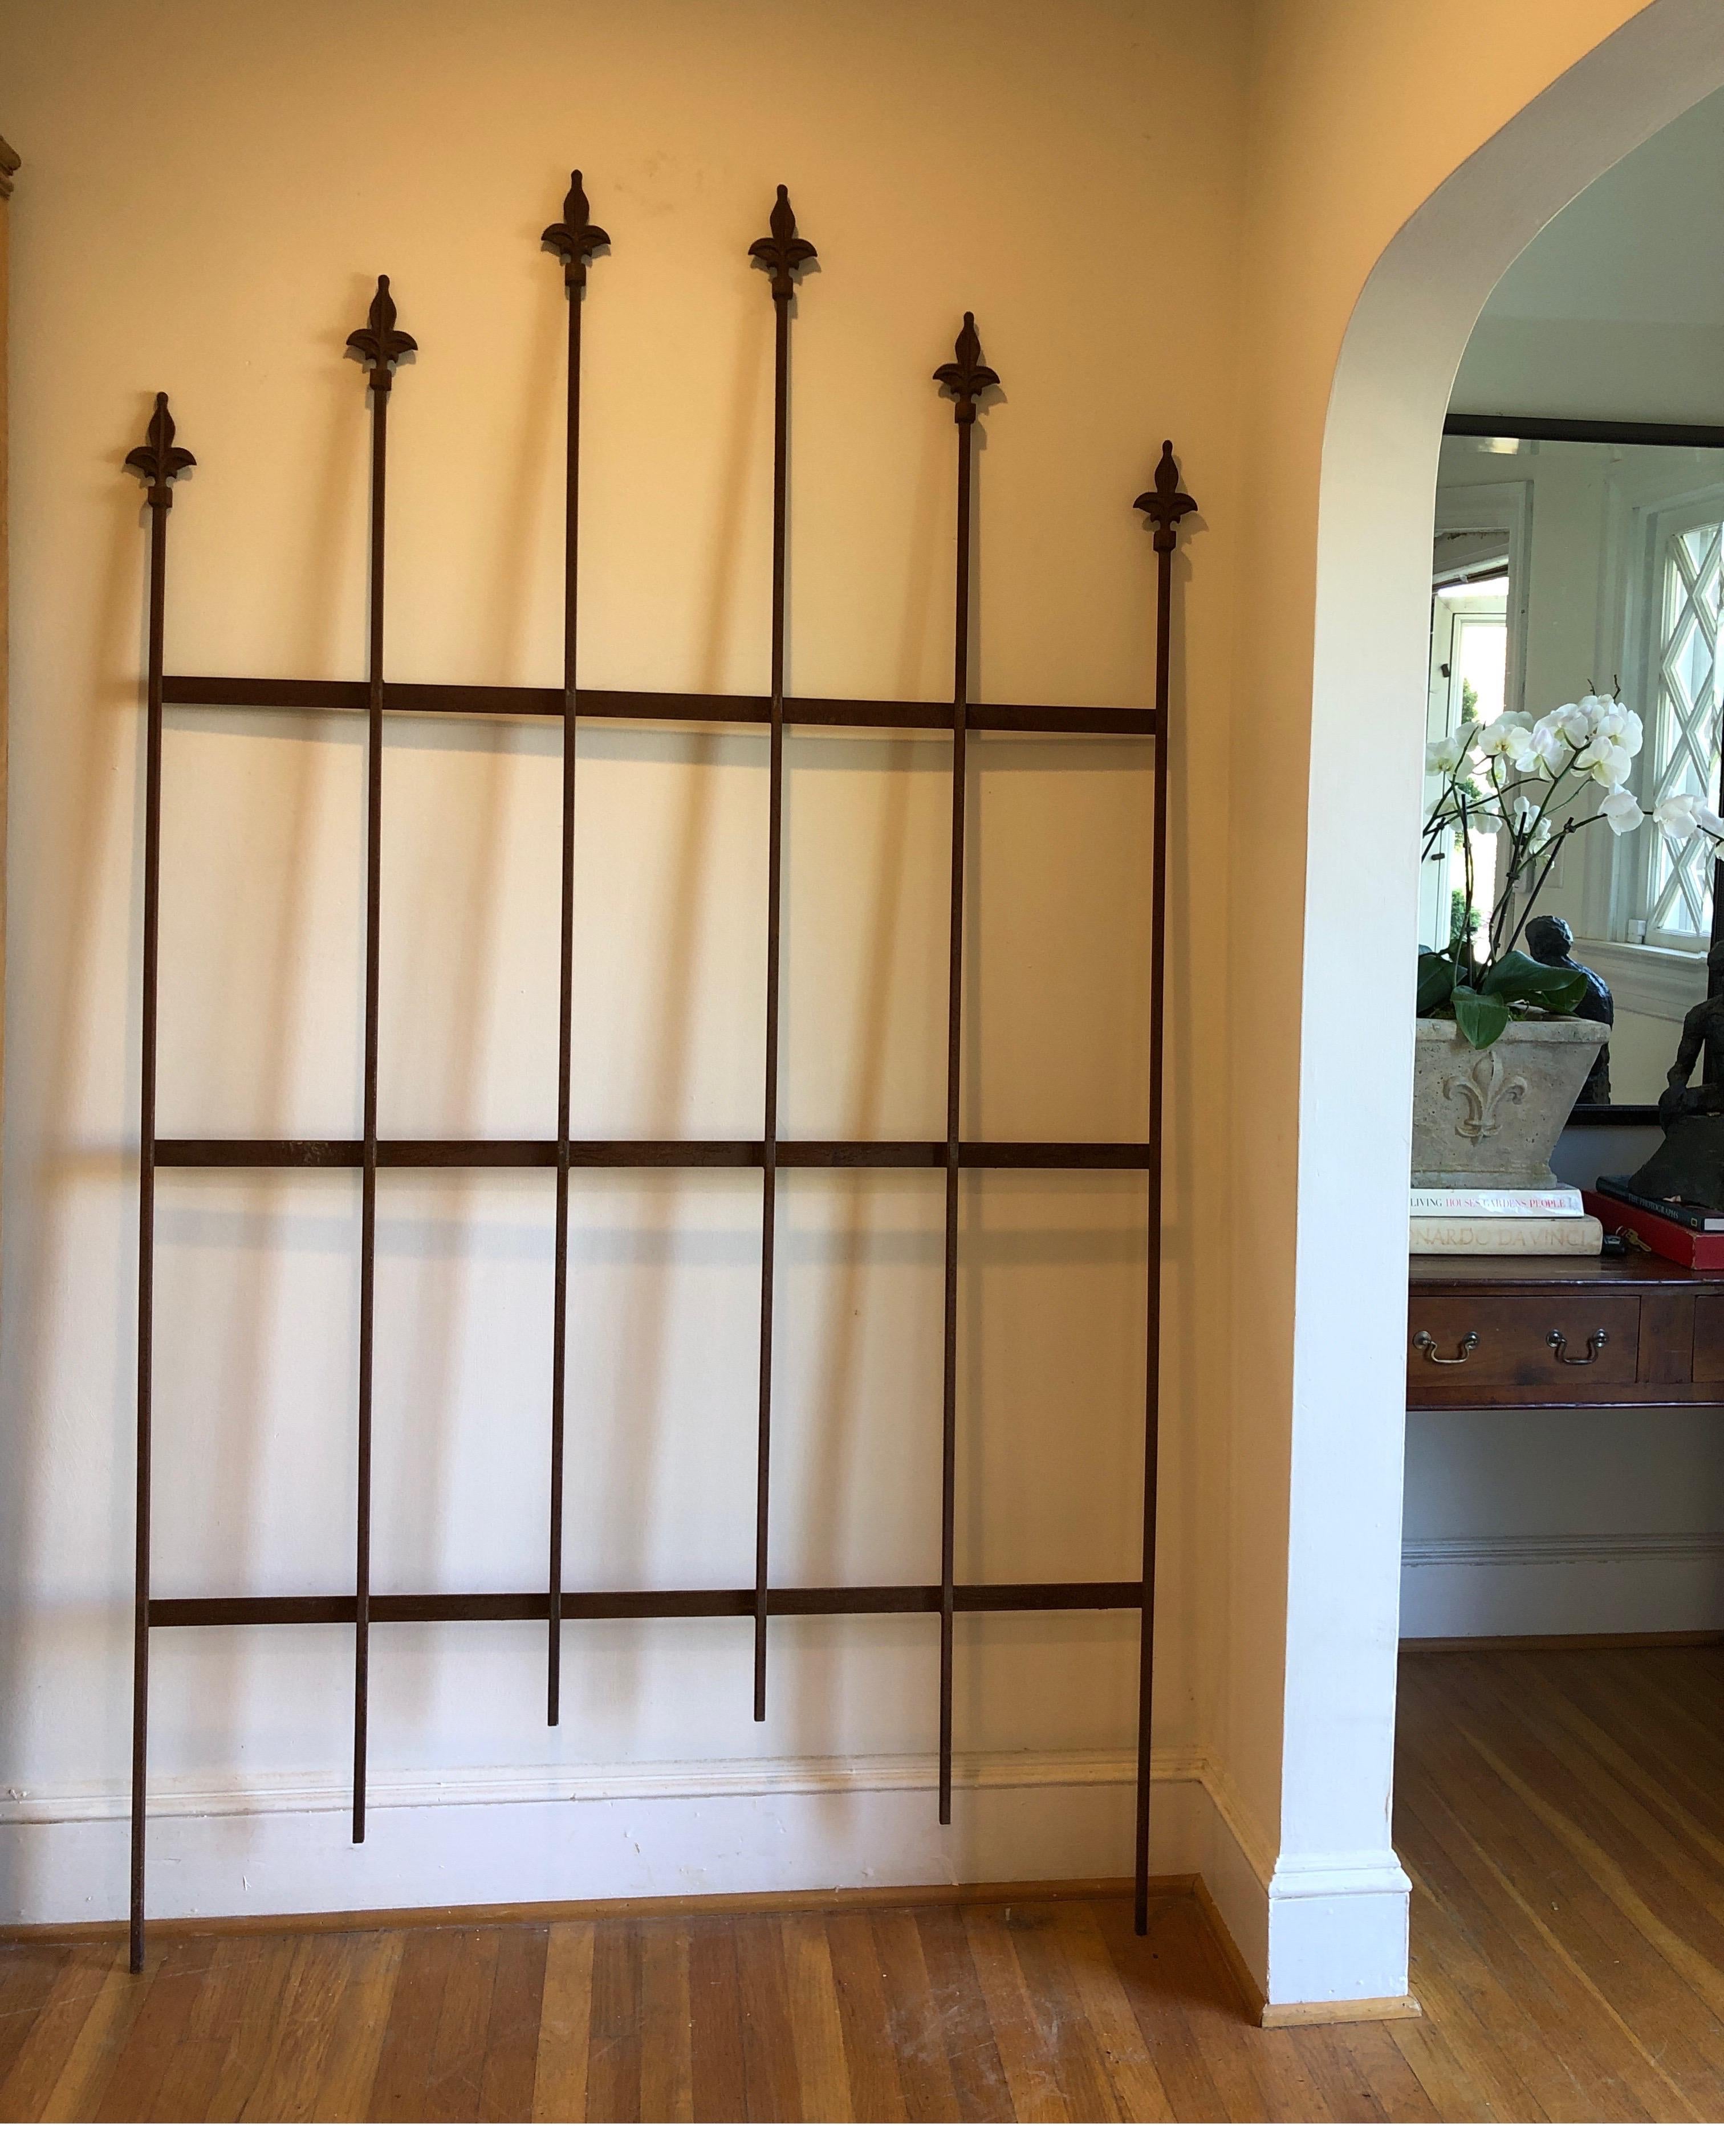 Rare set of 35 matching panels of antique wrought iron fencing with arched fleur di lys (Fleur-di-lis) Finials atop each rail. Very simplistic yet regal Victorian-era ornamental ironwork. All Hand Forged panels and truly hard to find in such a large